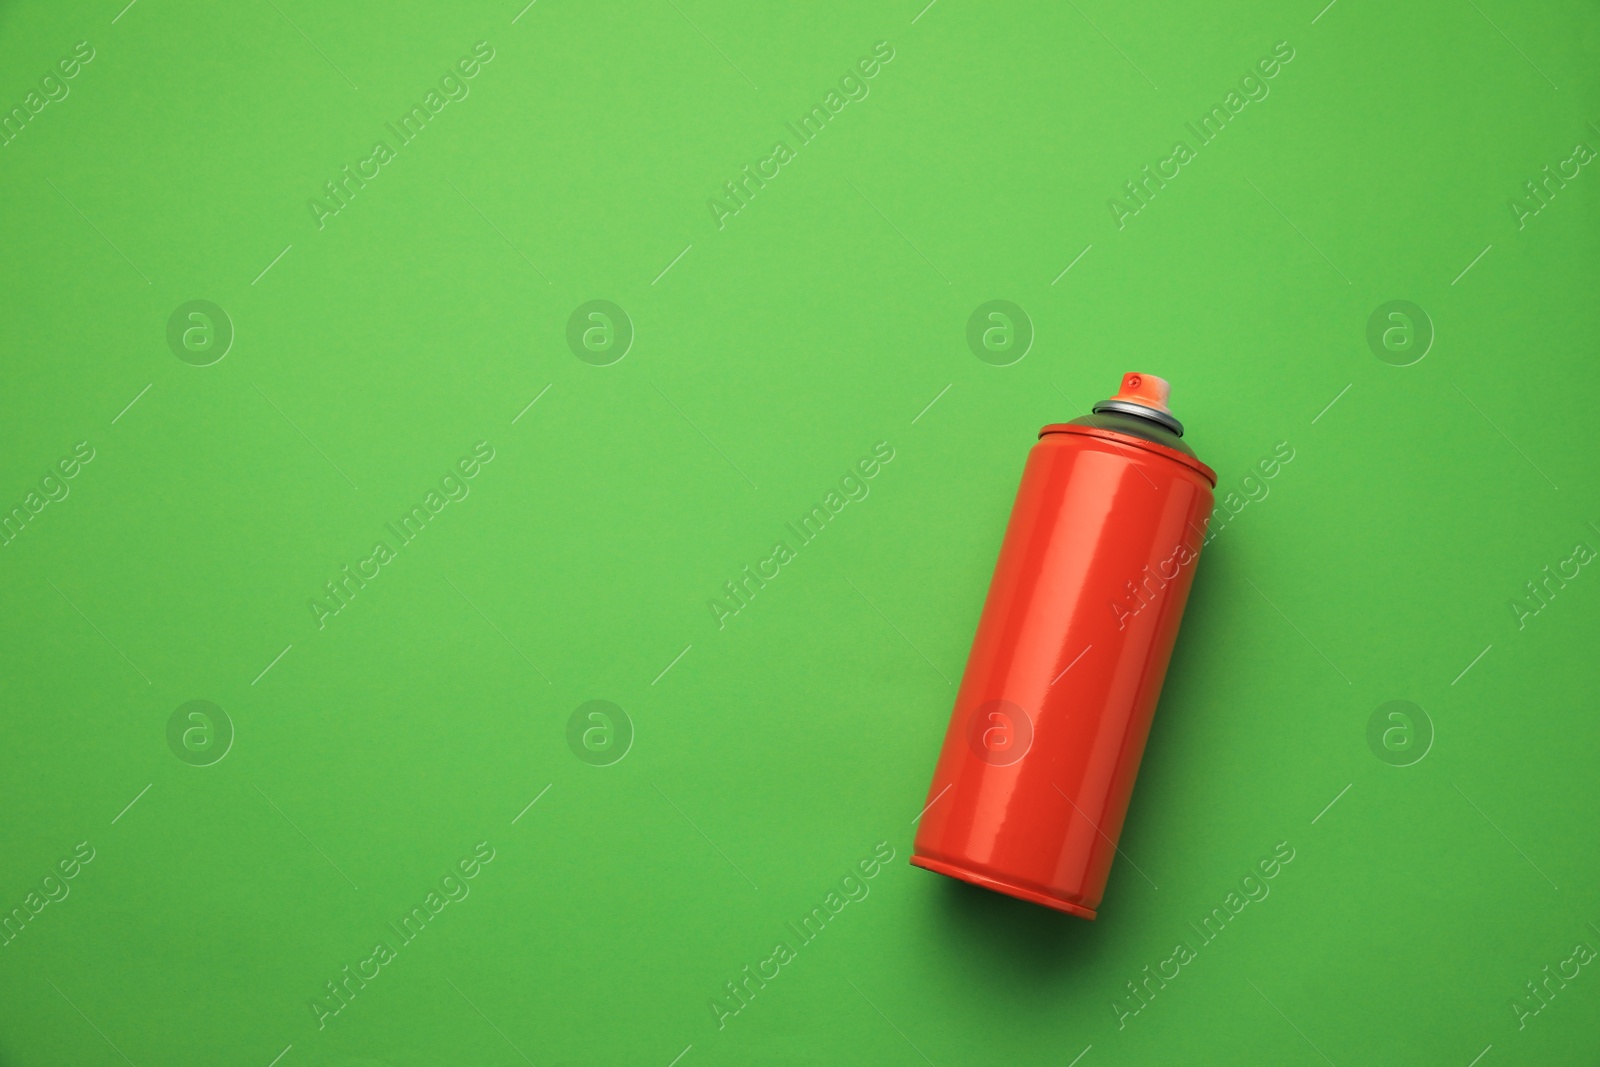 Photo of Can of red graffiti spray paint on green background, top view. Space for text